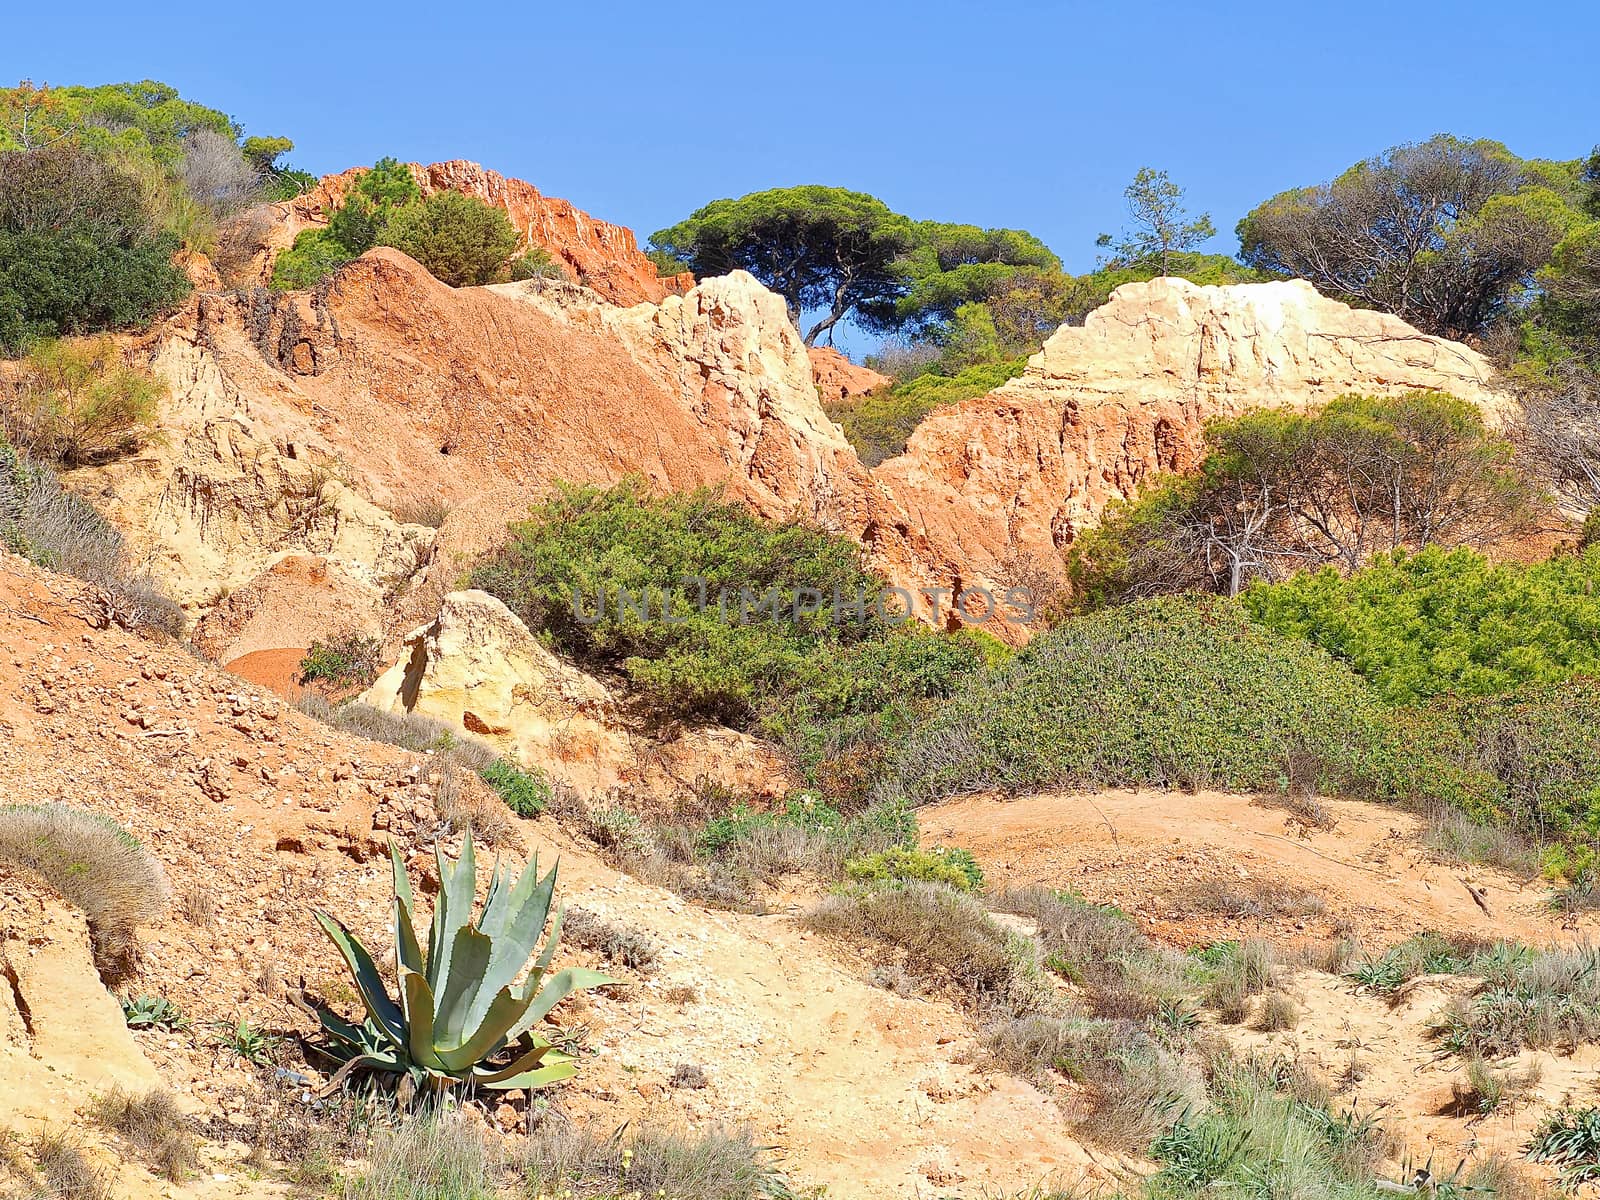 Wild nature with red cliffs at the Algarve coast of Portugal